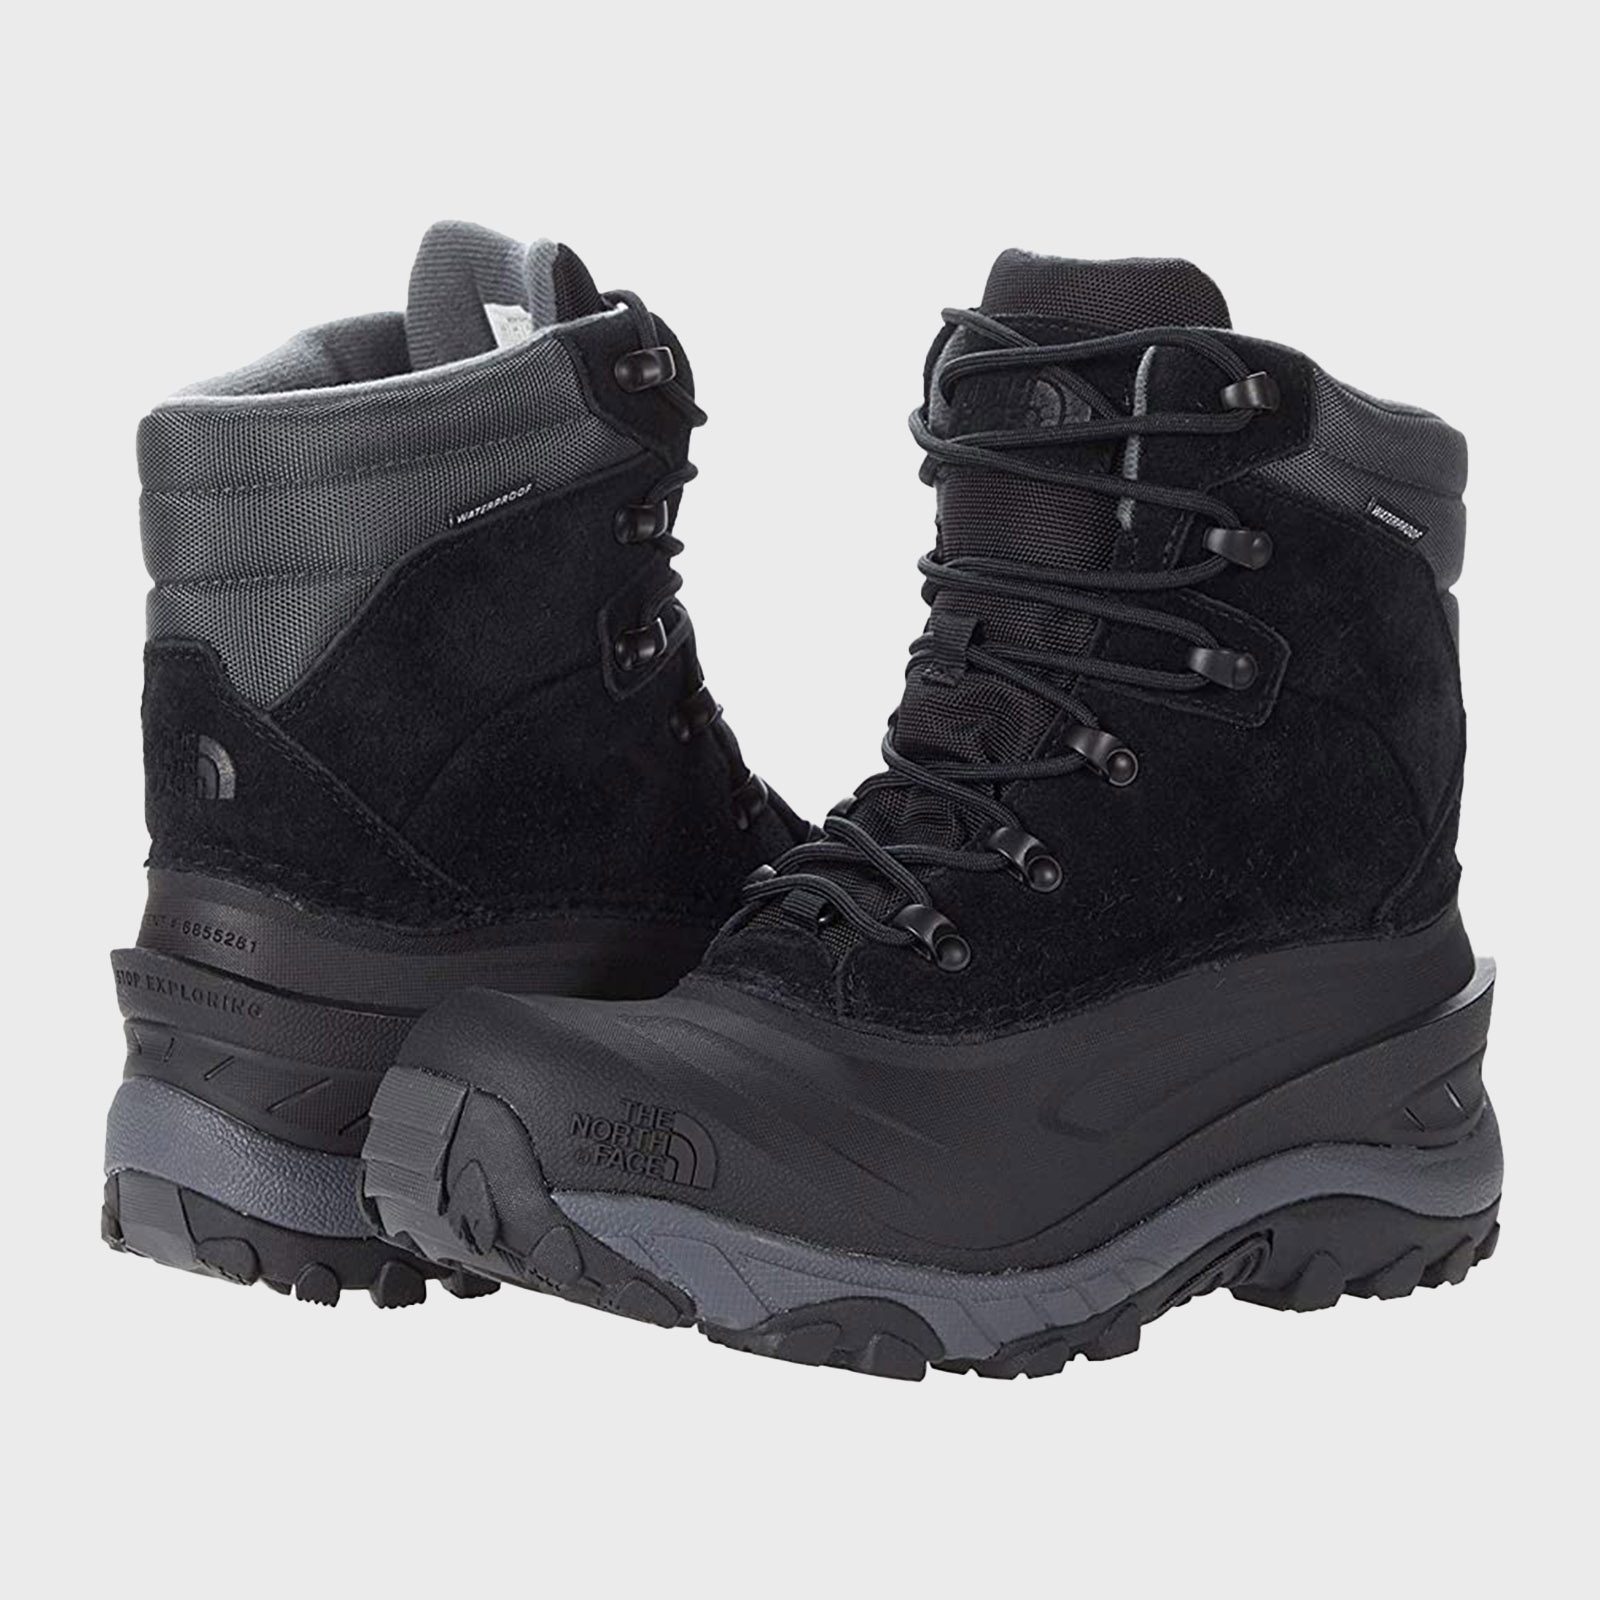 15 Best Zappos Boots for Winter 2022 | Winter Boots for the Whole Family